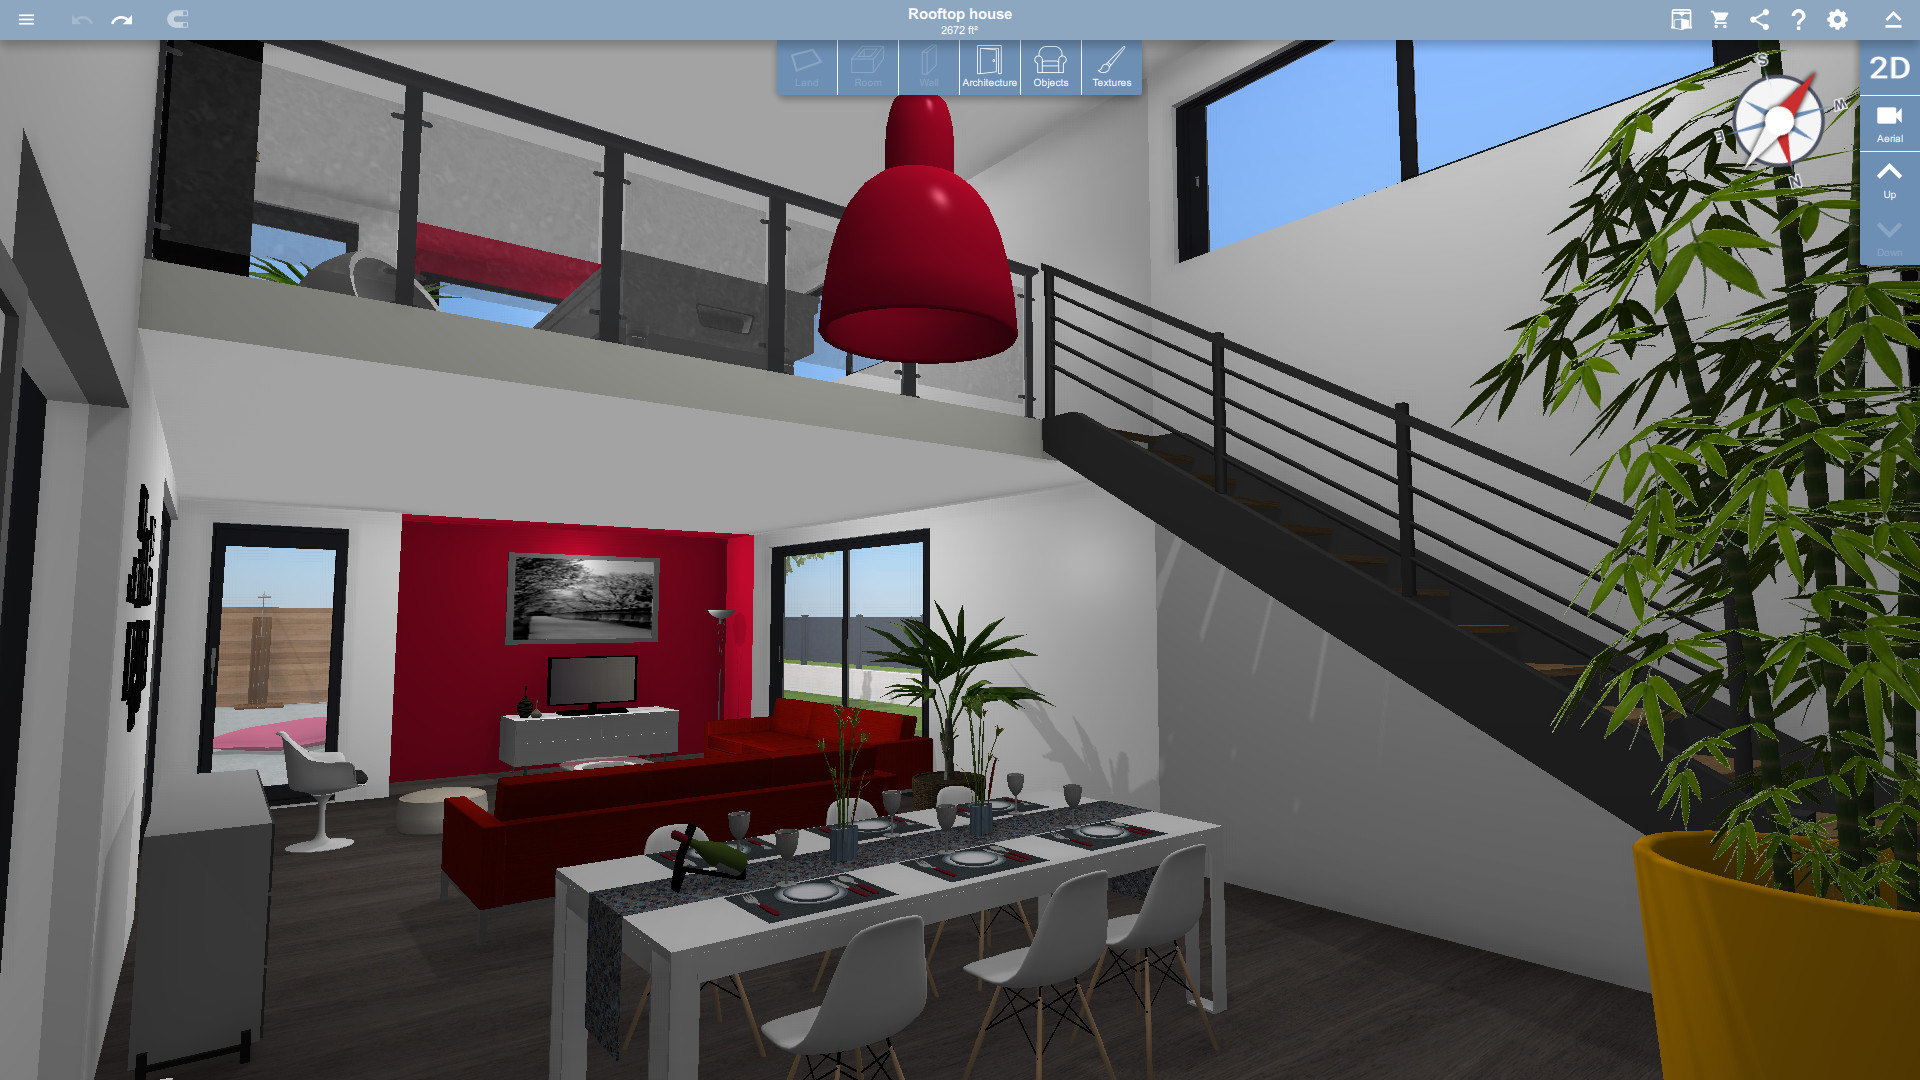 Save 75% on Home Design 3D on Steam